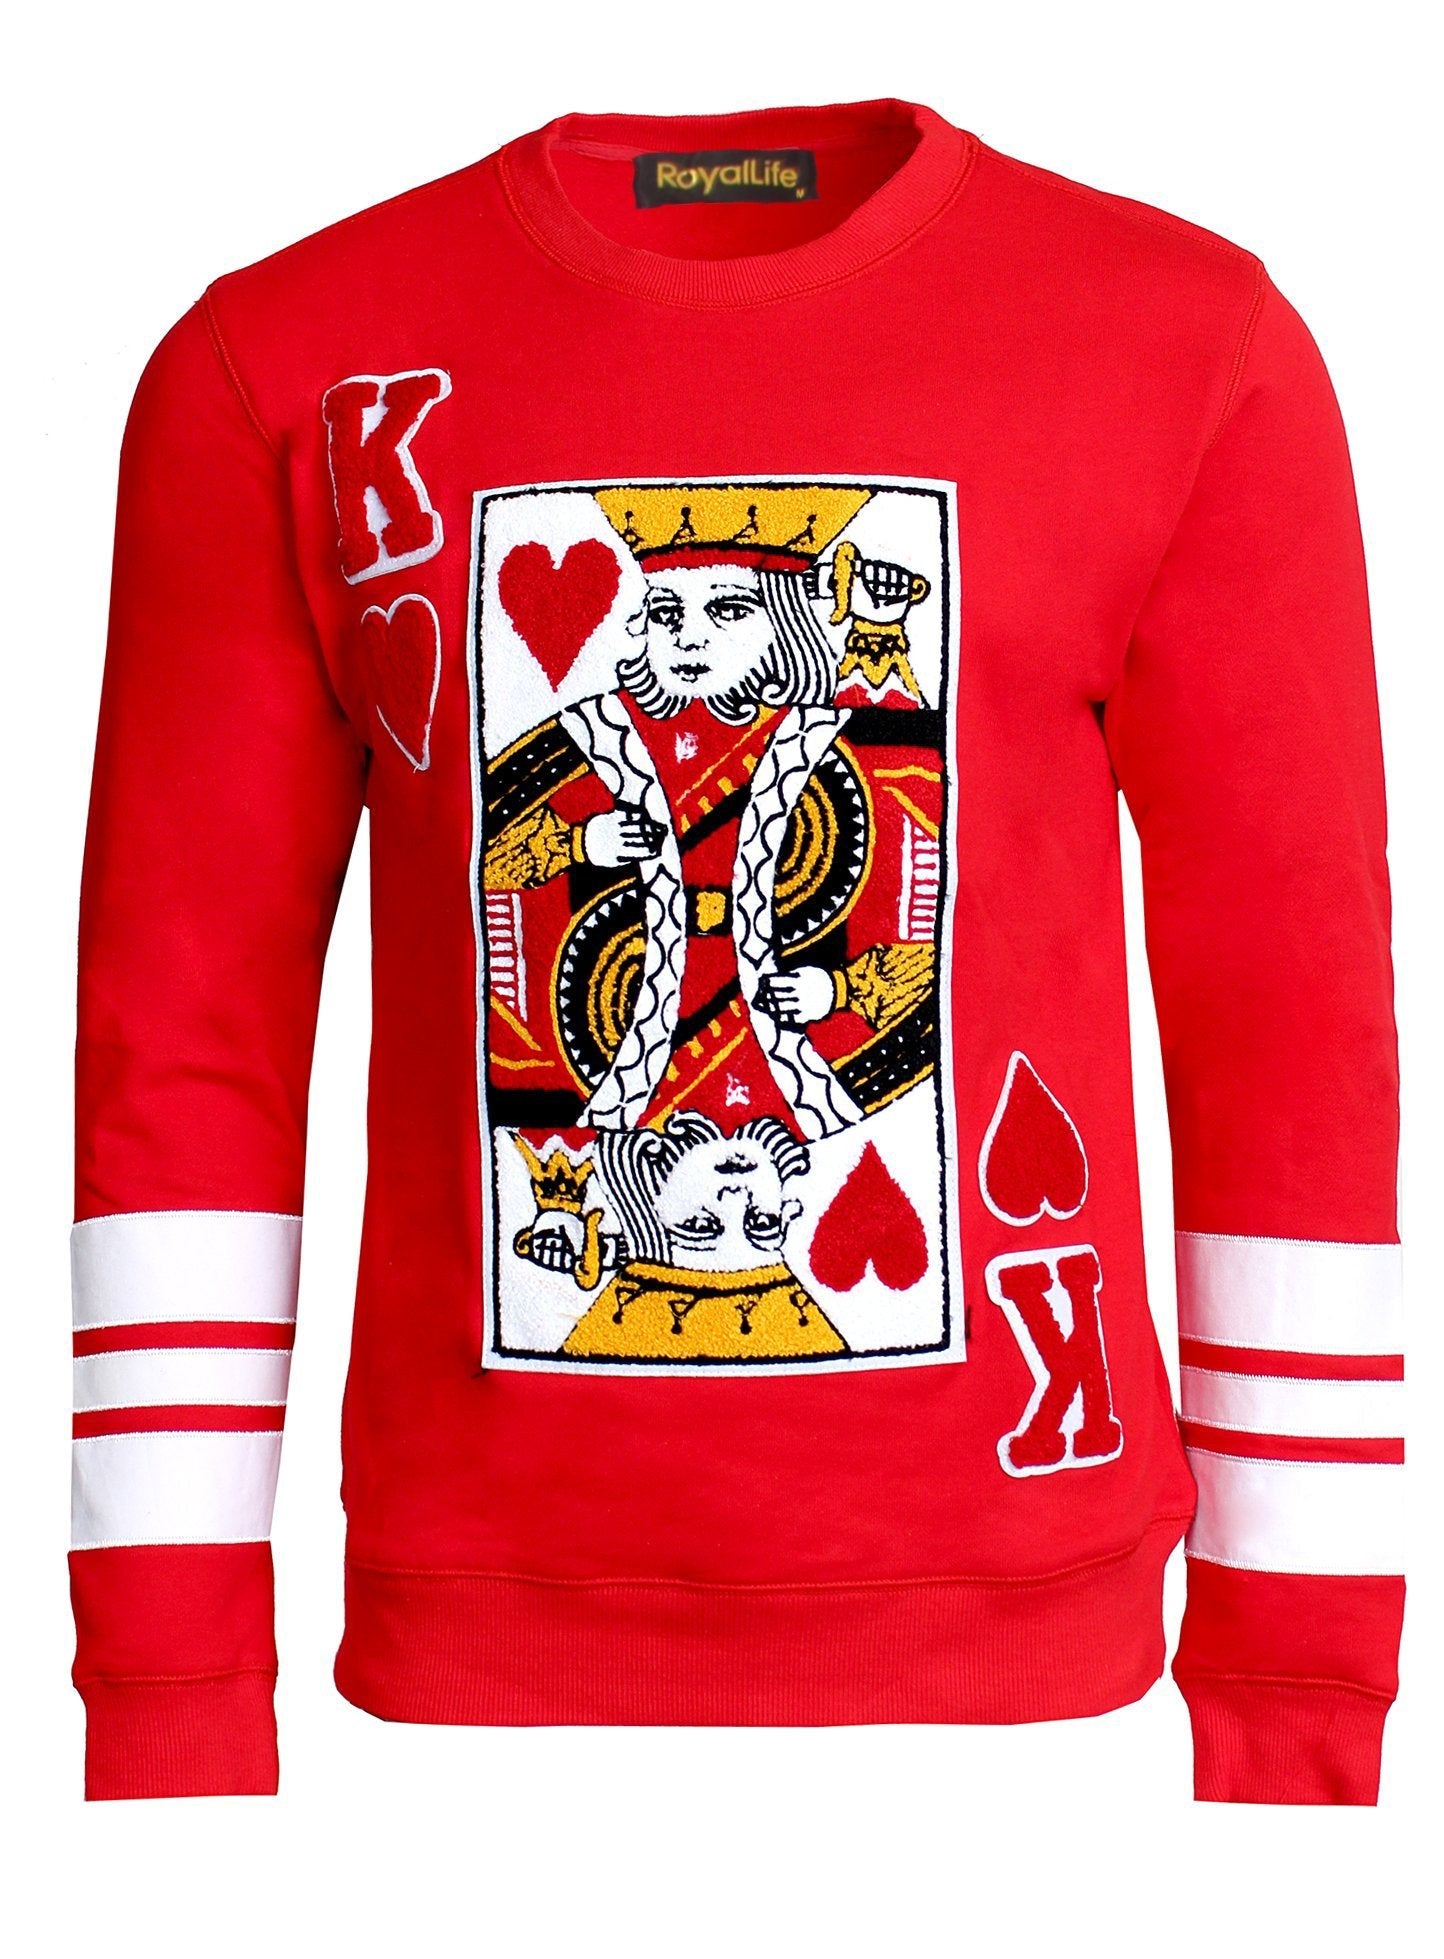 King Sweater as seen in the Baby Driver Movie on Jaime Foxx